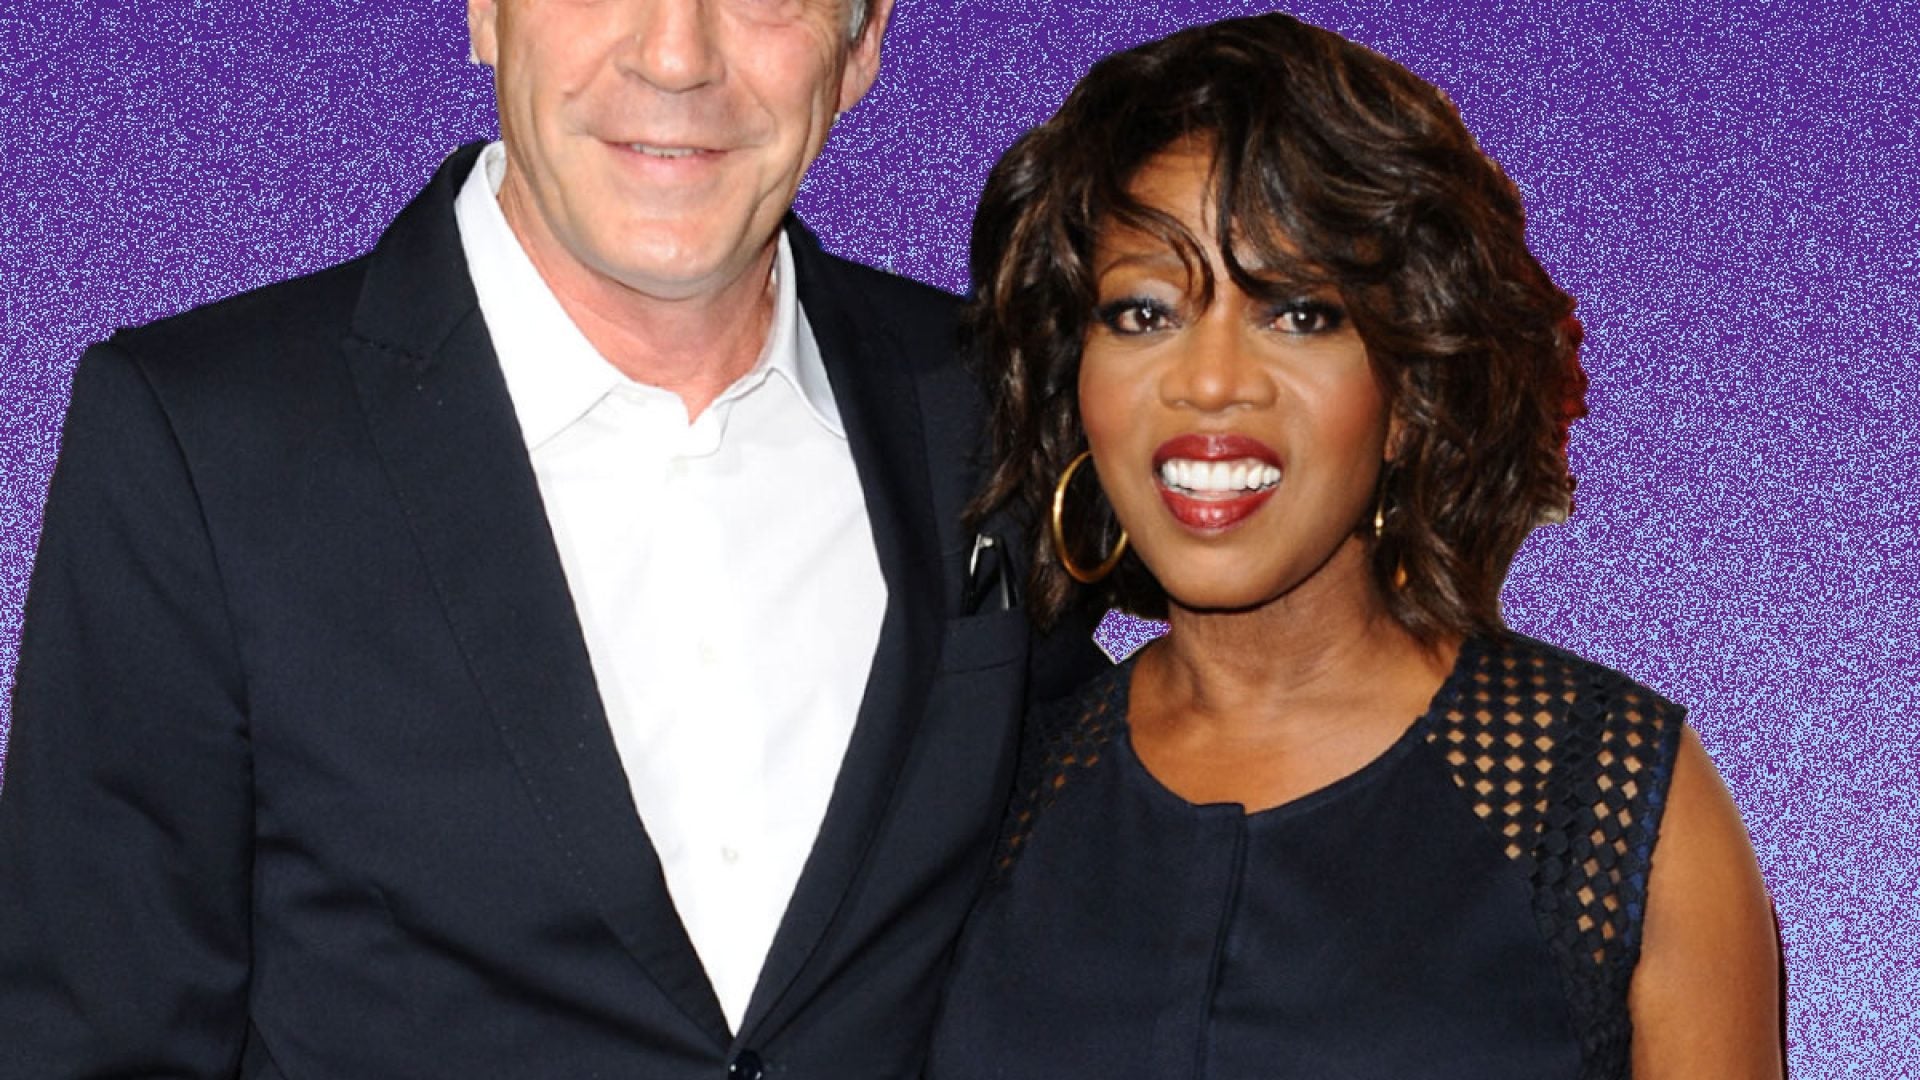 Alfre Woodard’s Husband Had The Secret Sauce To Make Her A Sexy, Adventurous Leading Lady